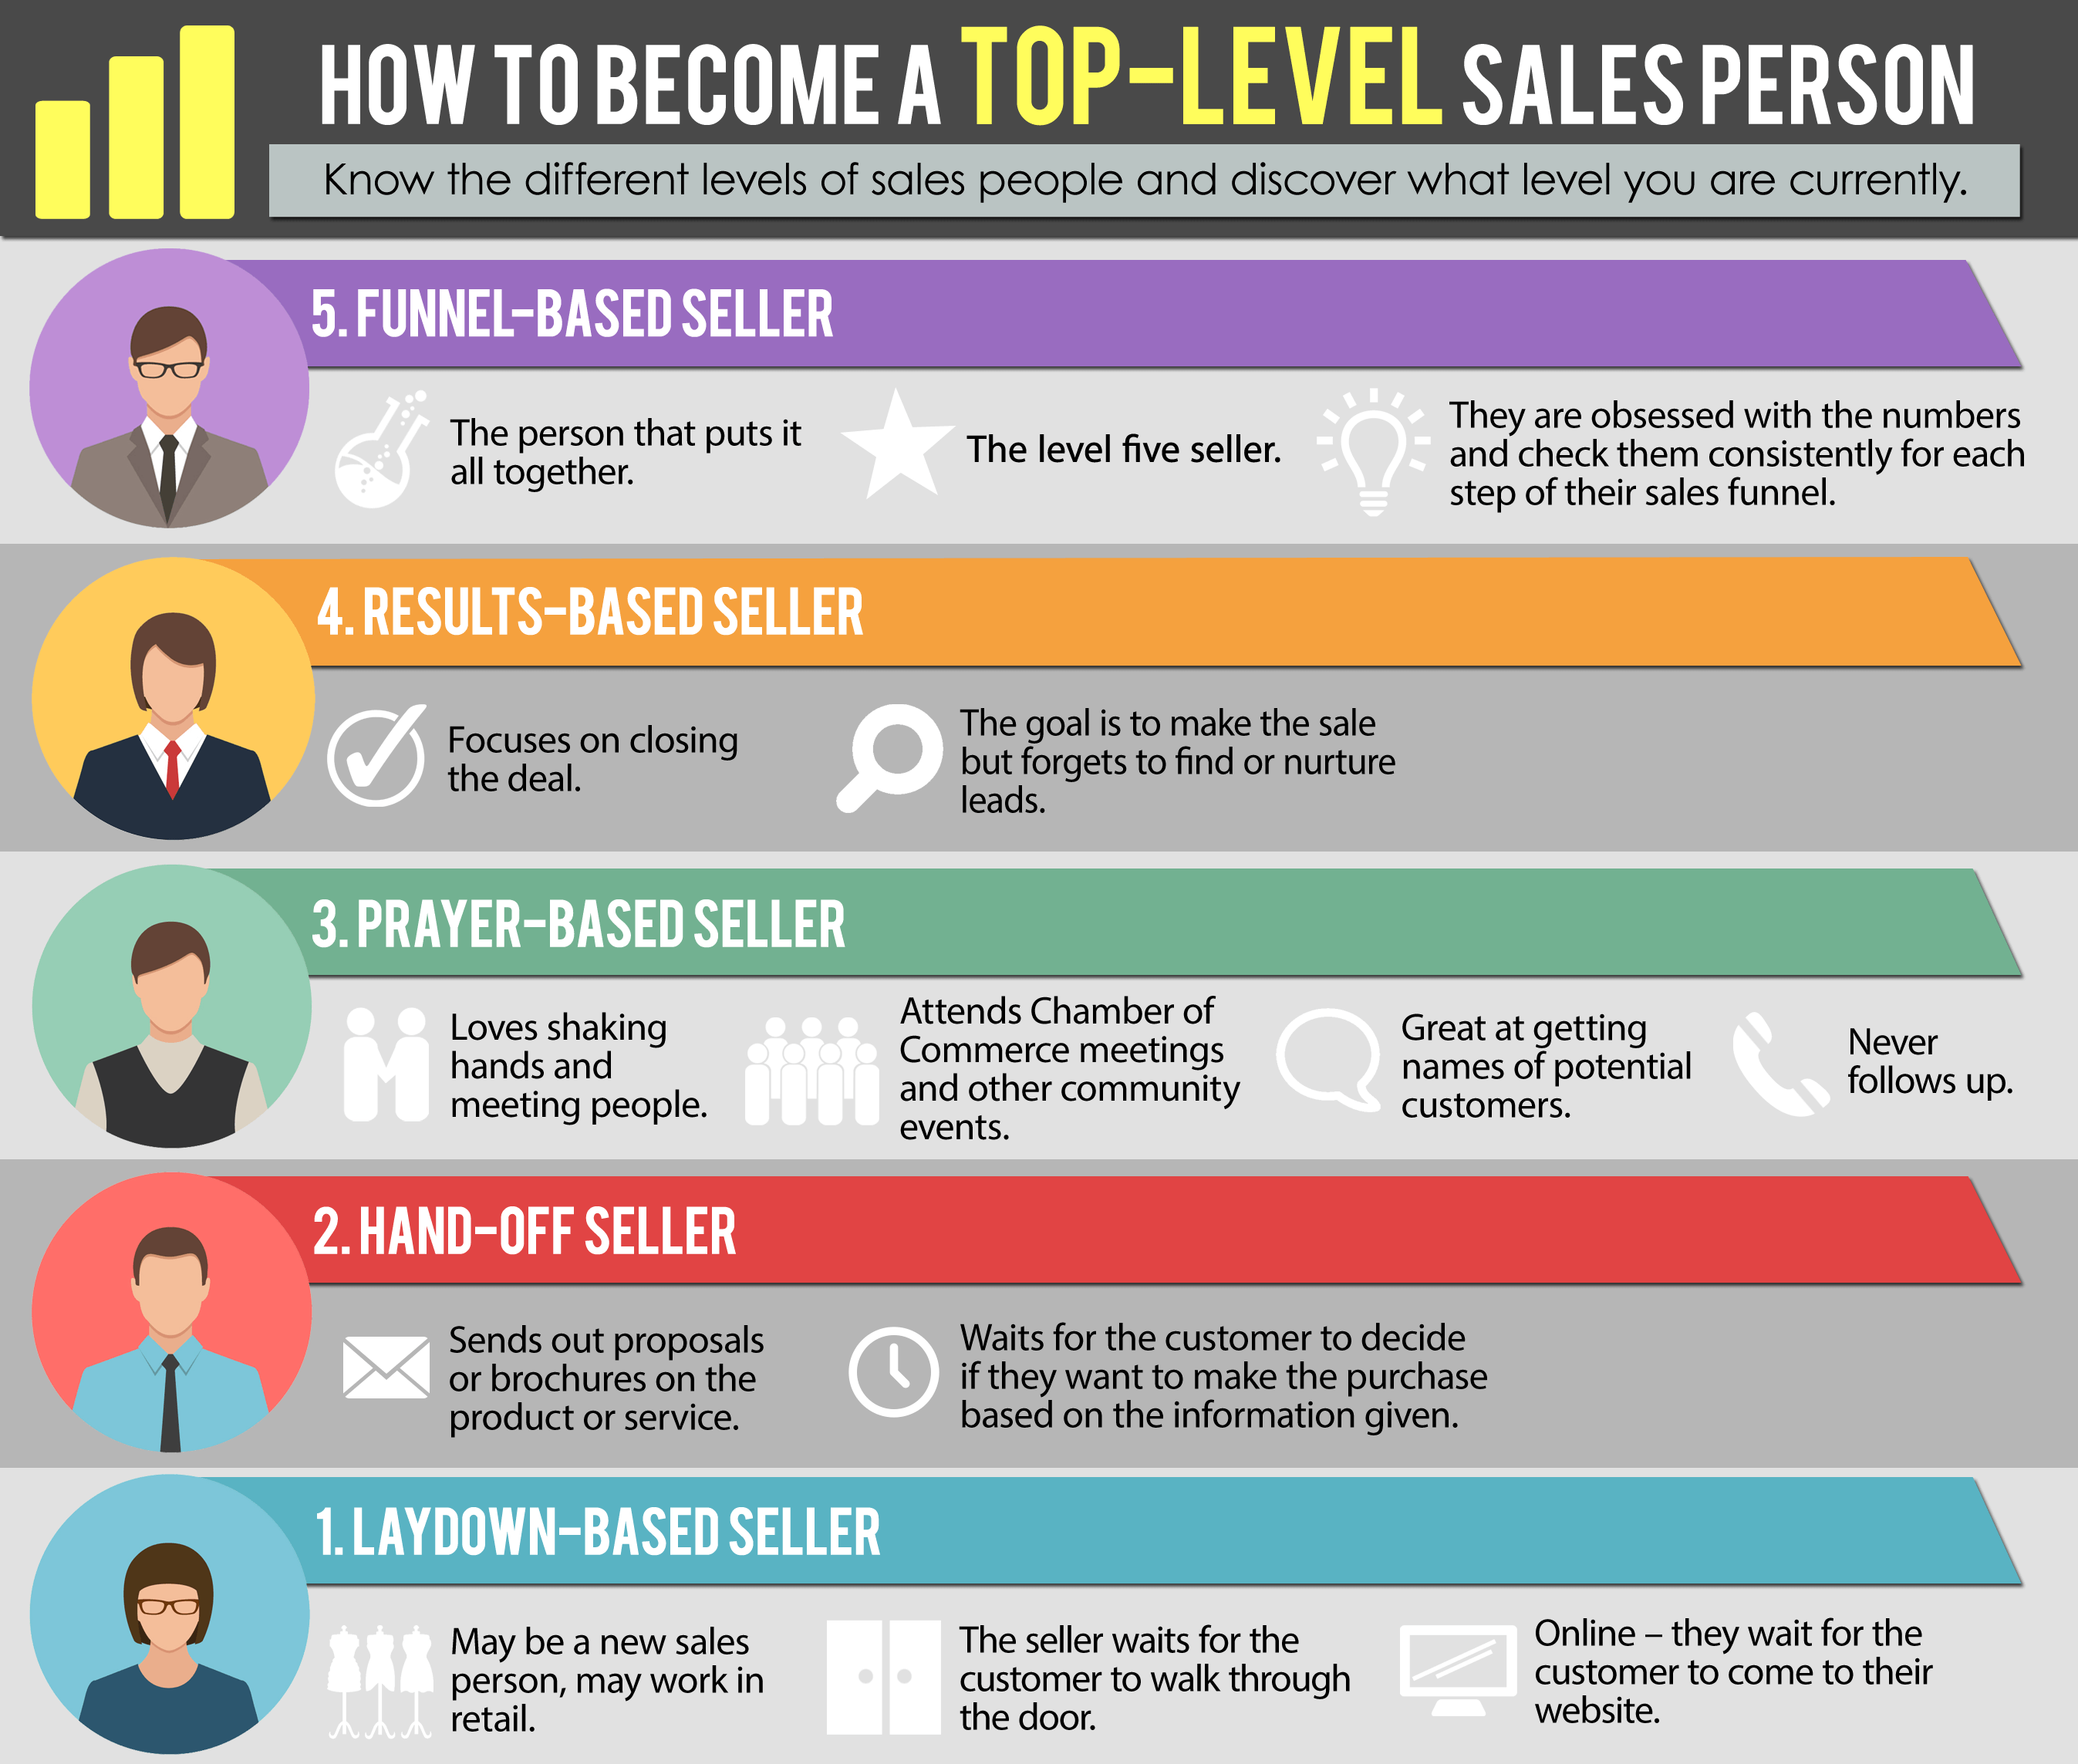 how to become a top level salesperson infographic Image